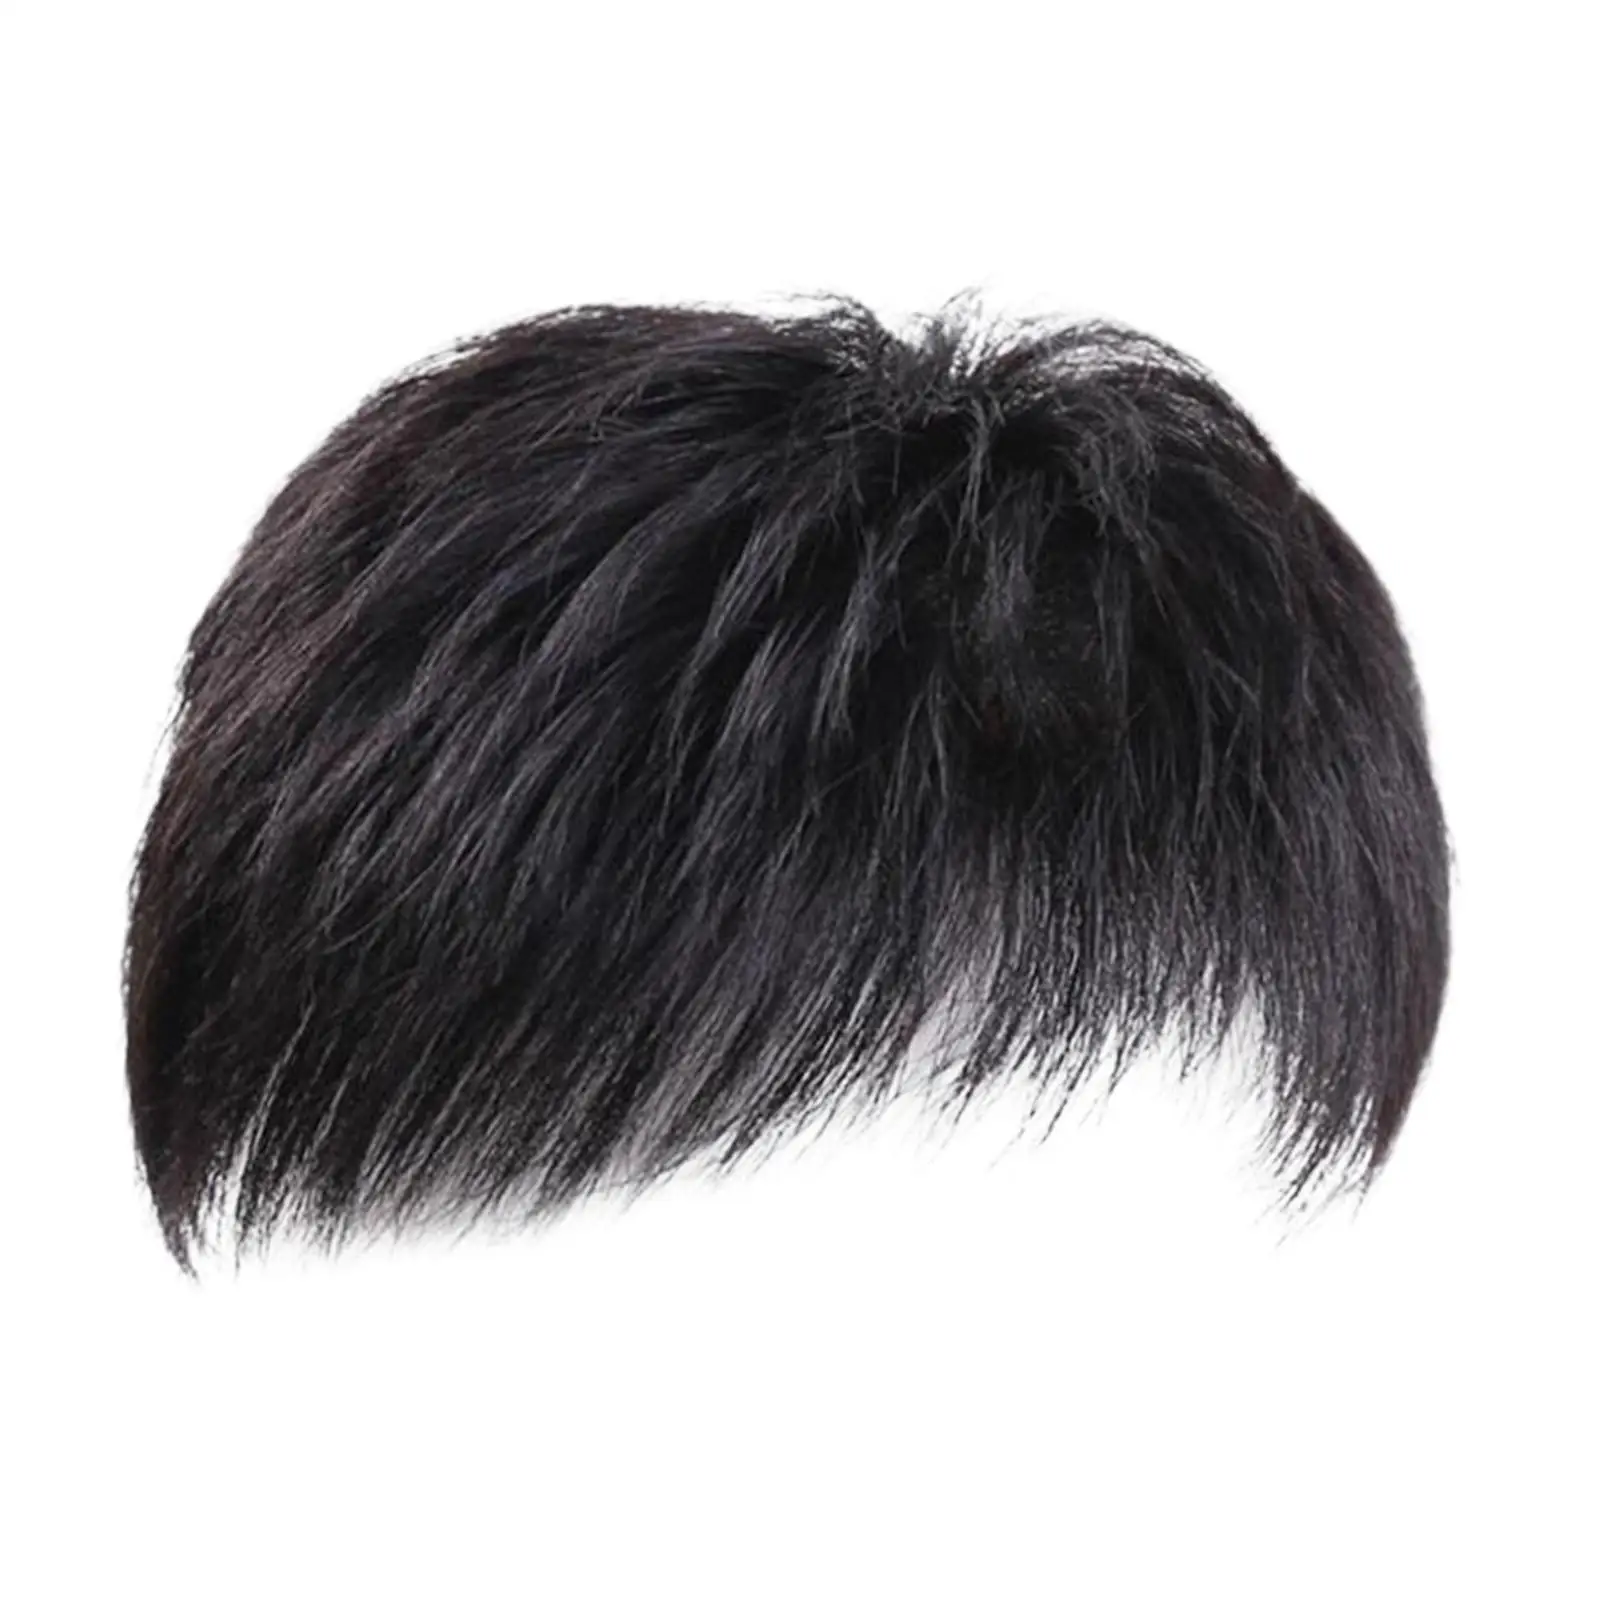 Replacement Synthetic Short Hair Topper Men Short Toppers Hairpiece Short Men Topper Wig for Covering White Loss Hair Toupee